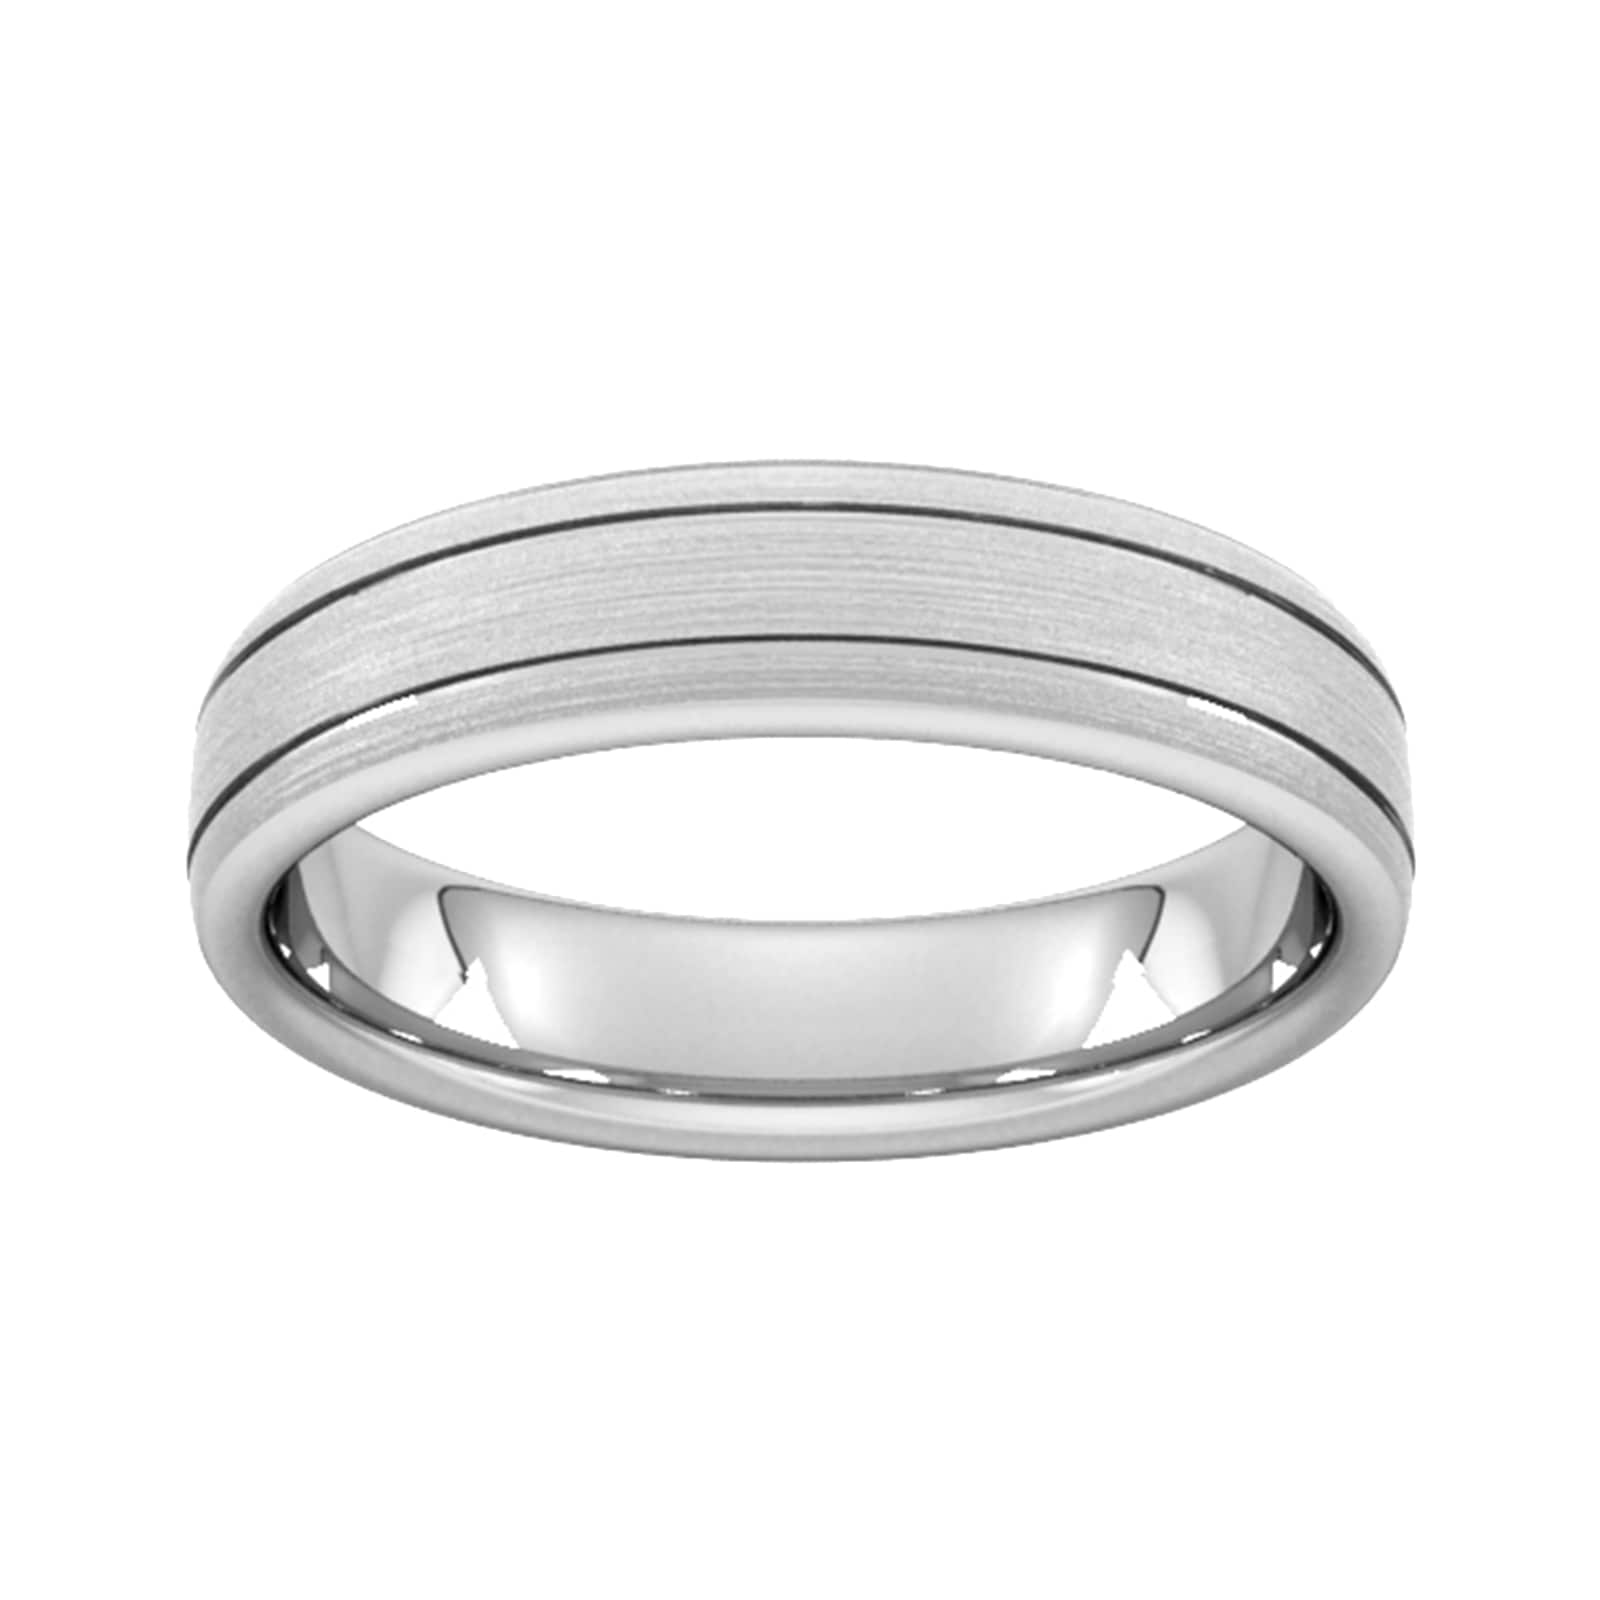 5mm Flat Court Heavy Matt Finish With Double Grooves Wedding Ring In 950 Palladium - Ring Size Q